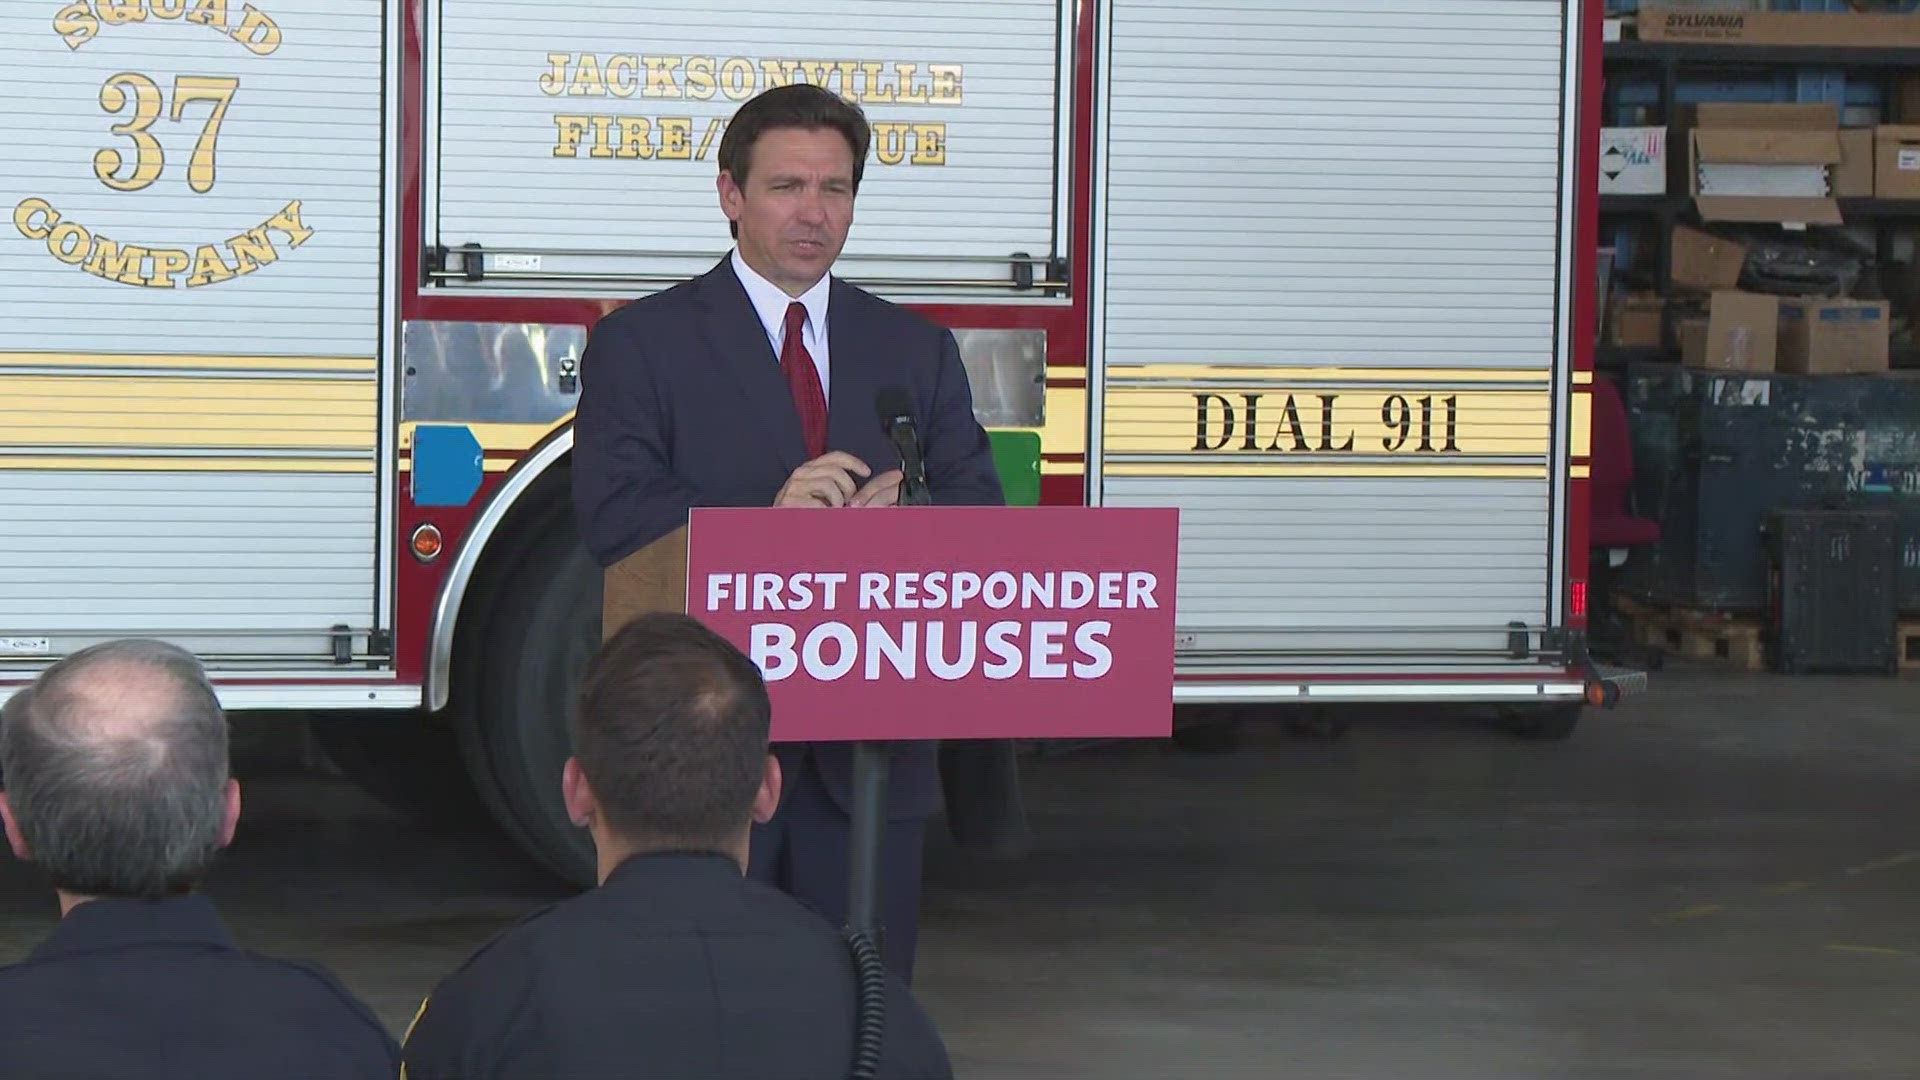 Governor Ron DeSantis, for the third year in a row, announced bonuses for first responders during a press conference in Jacksonville Monday afternoon.